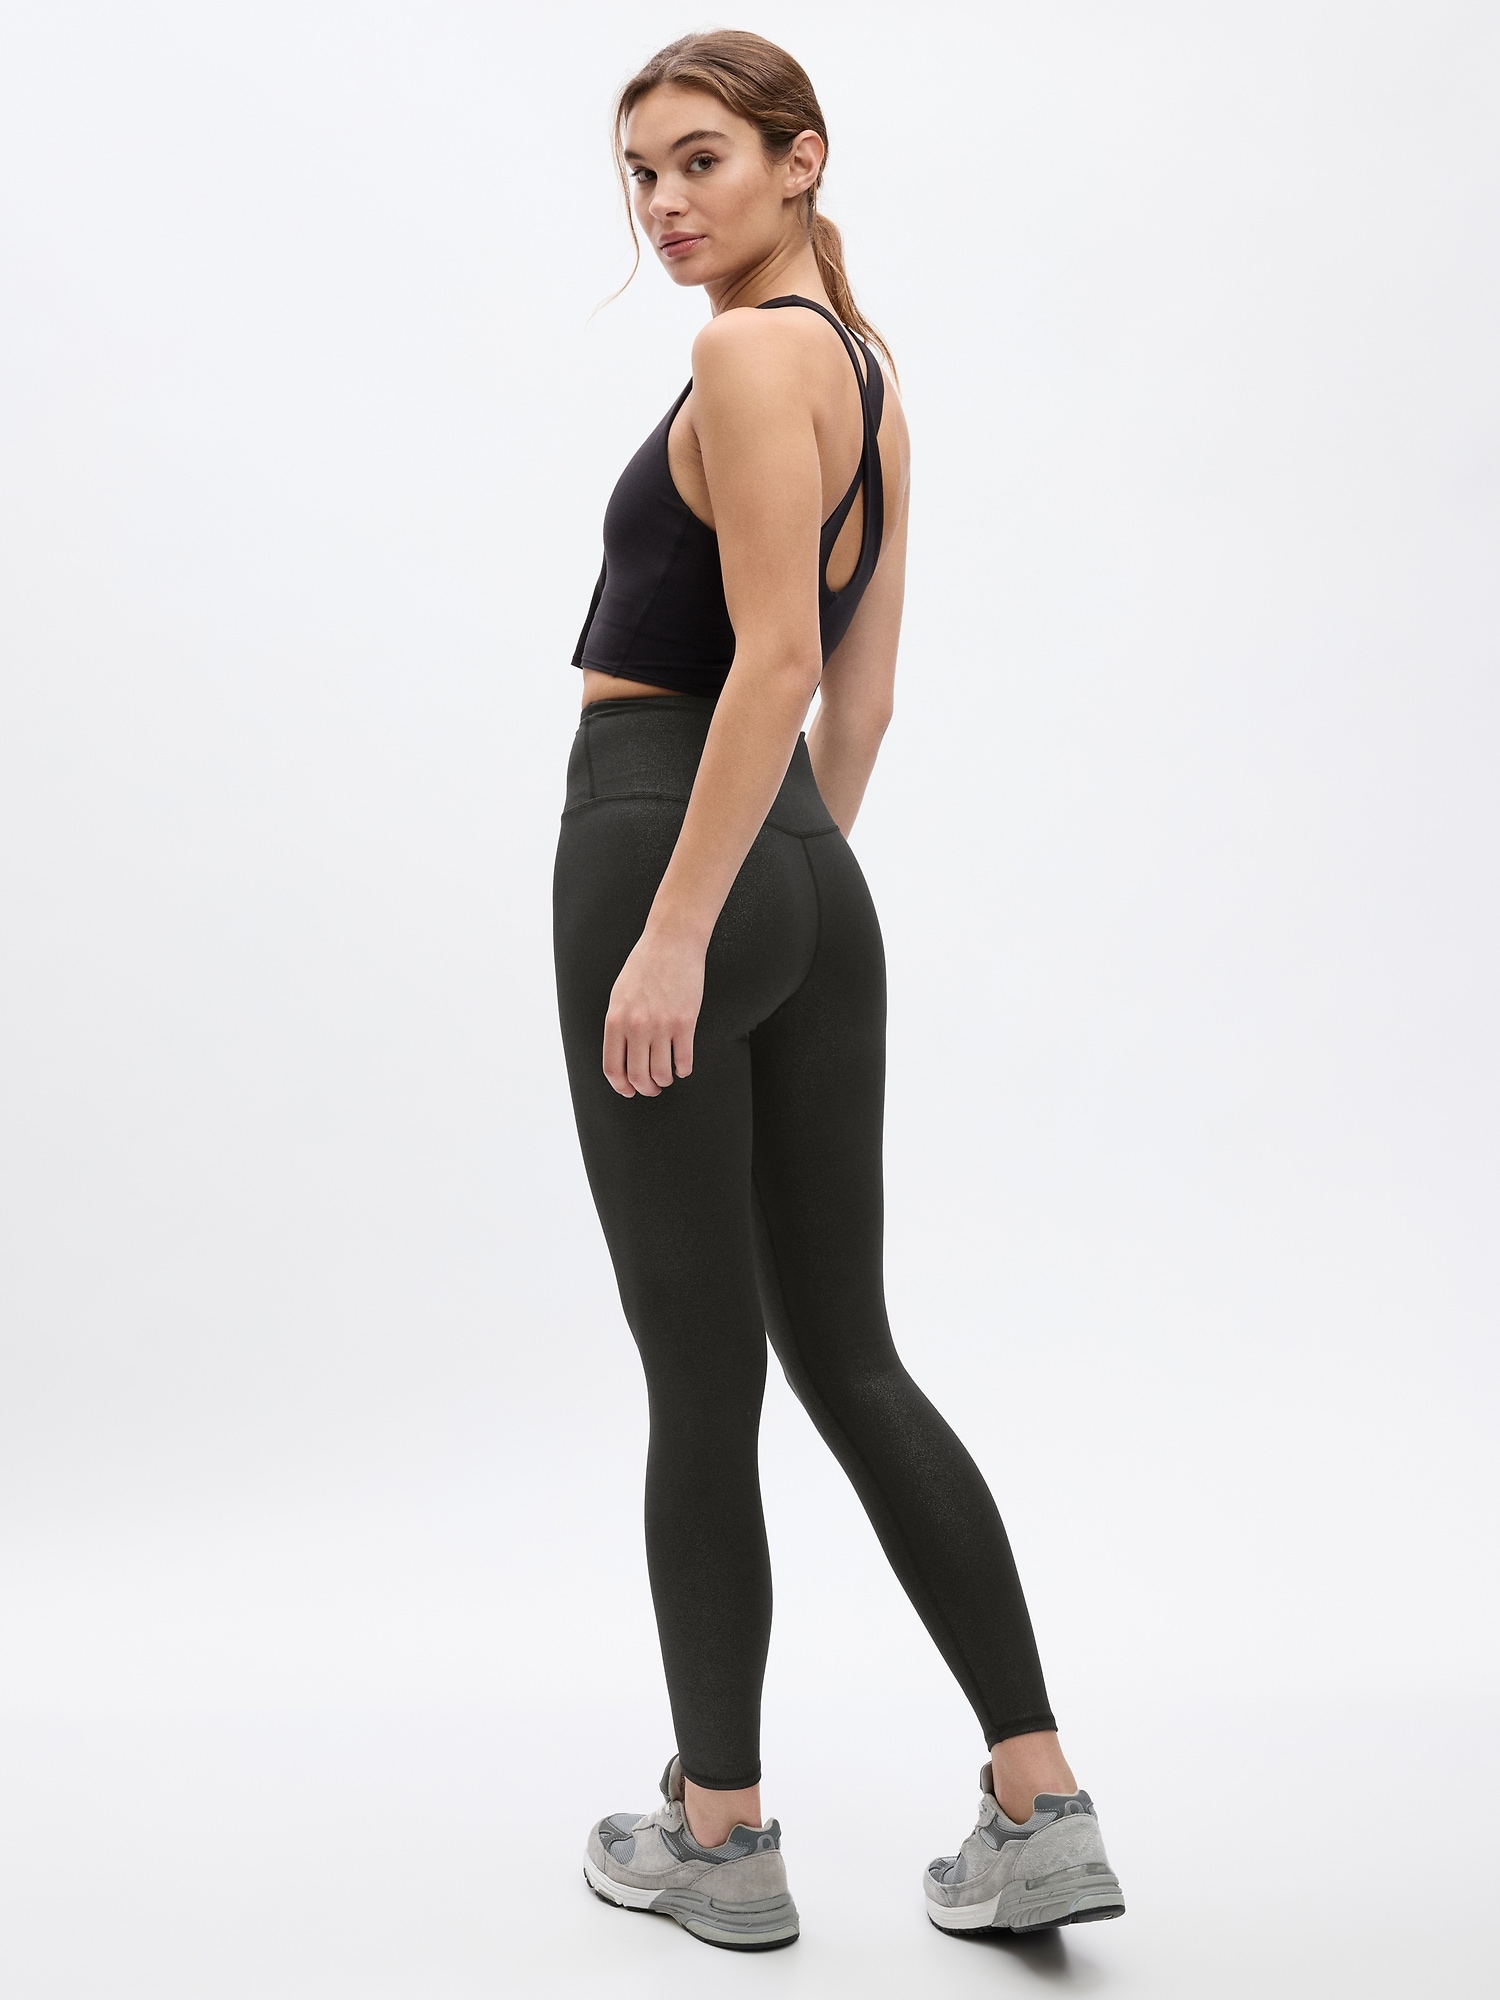 BLVB Capri Leggings for Women High Waisted Stretchy Workout Tights